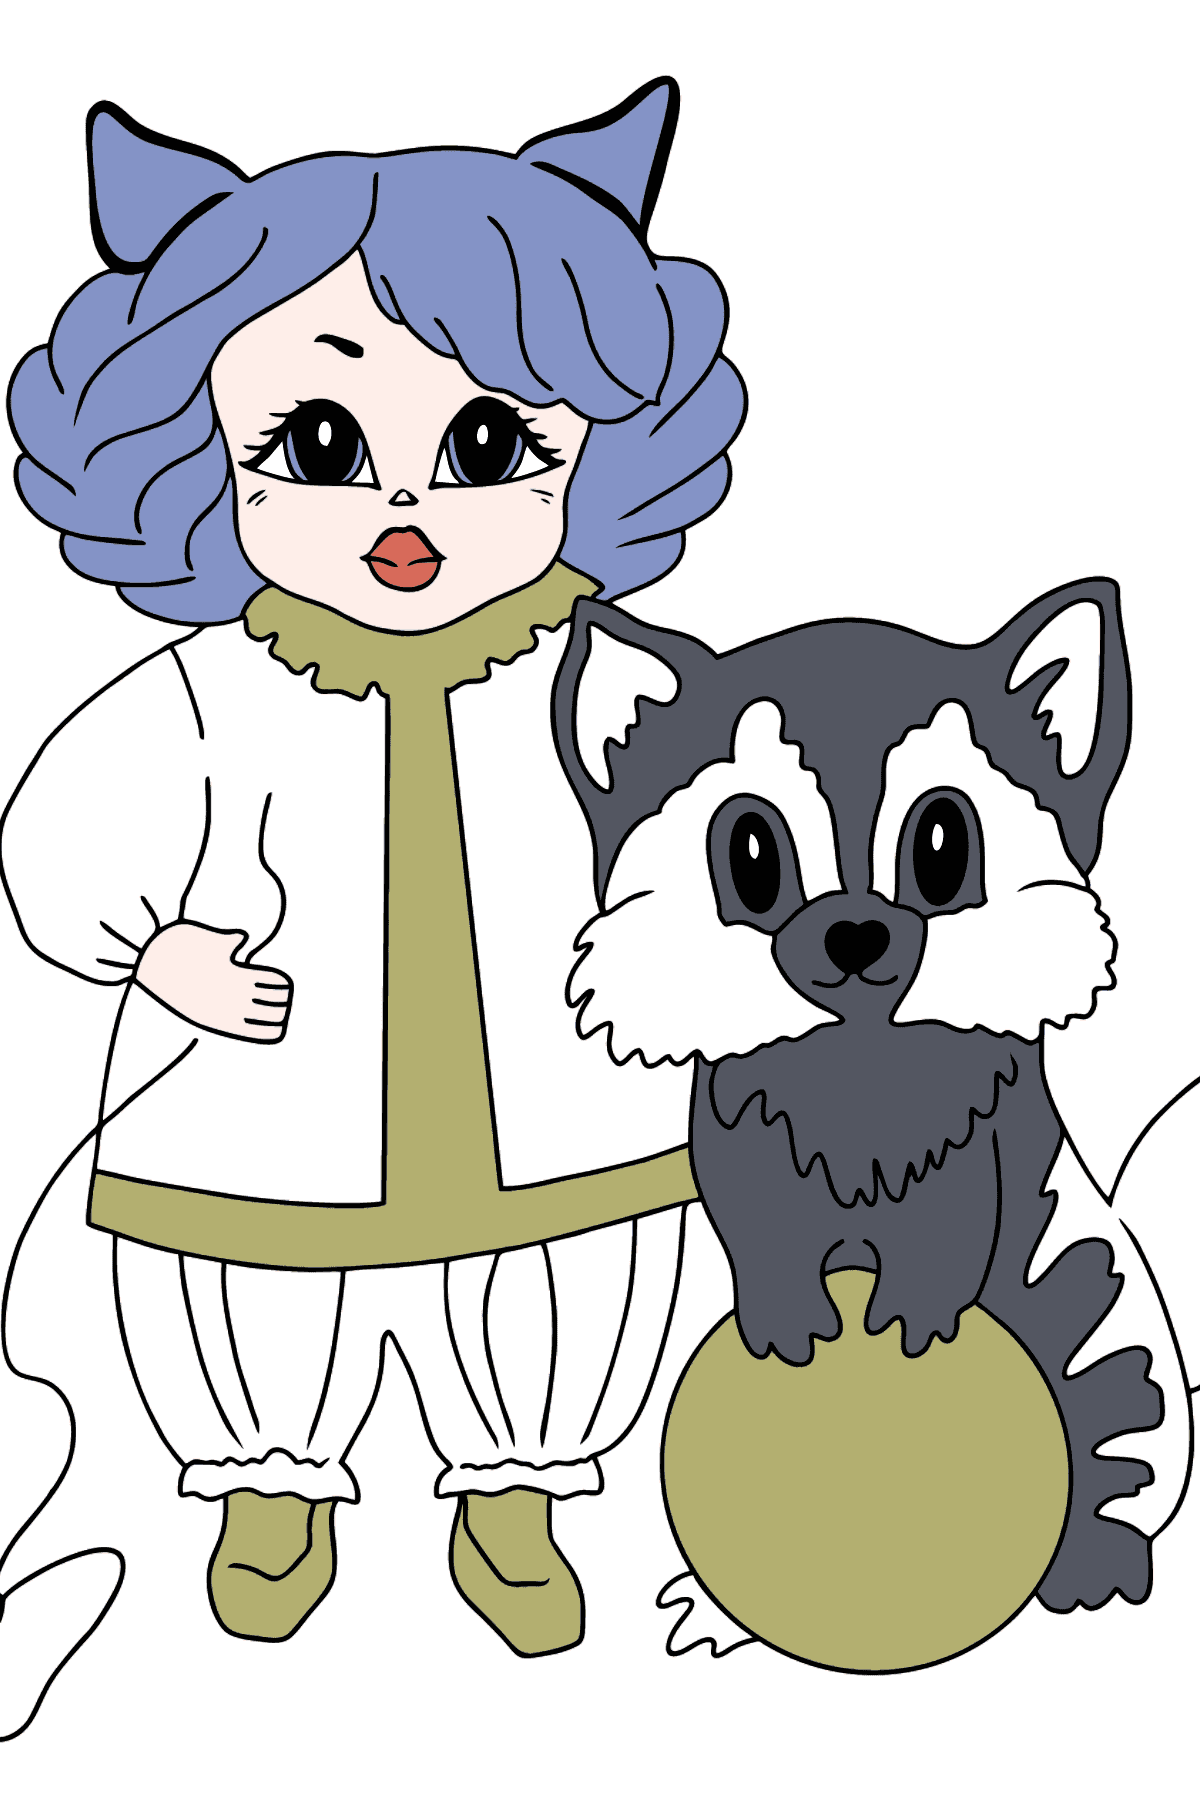 Princess and raccoon coloring page (simple) - Coloring Pages for Kids